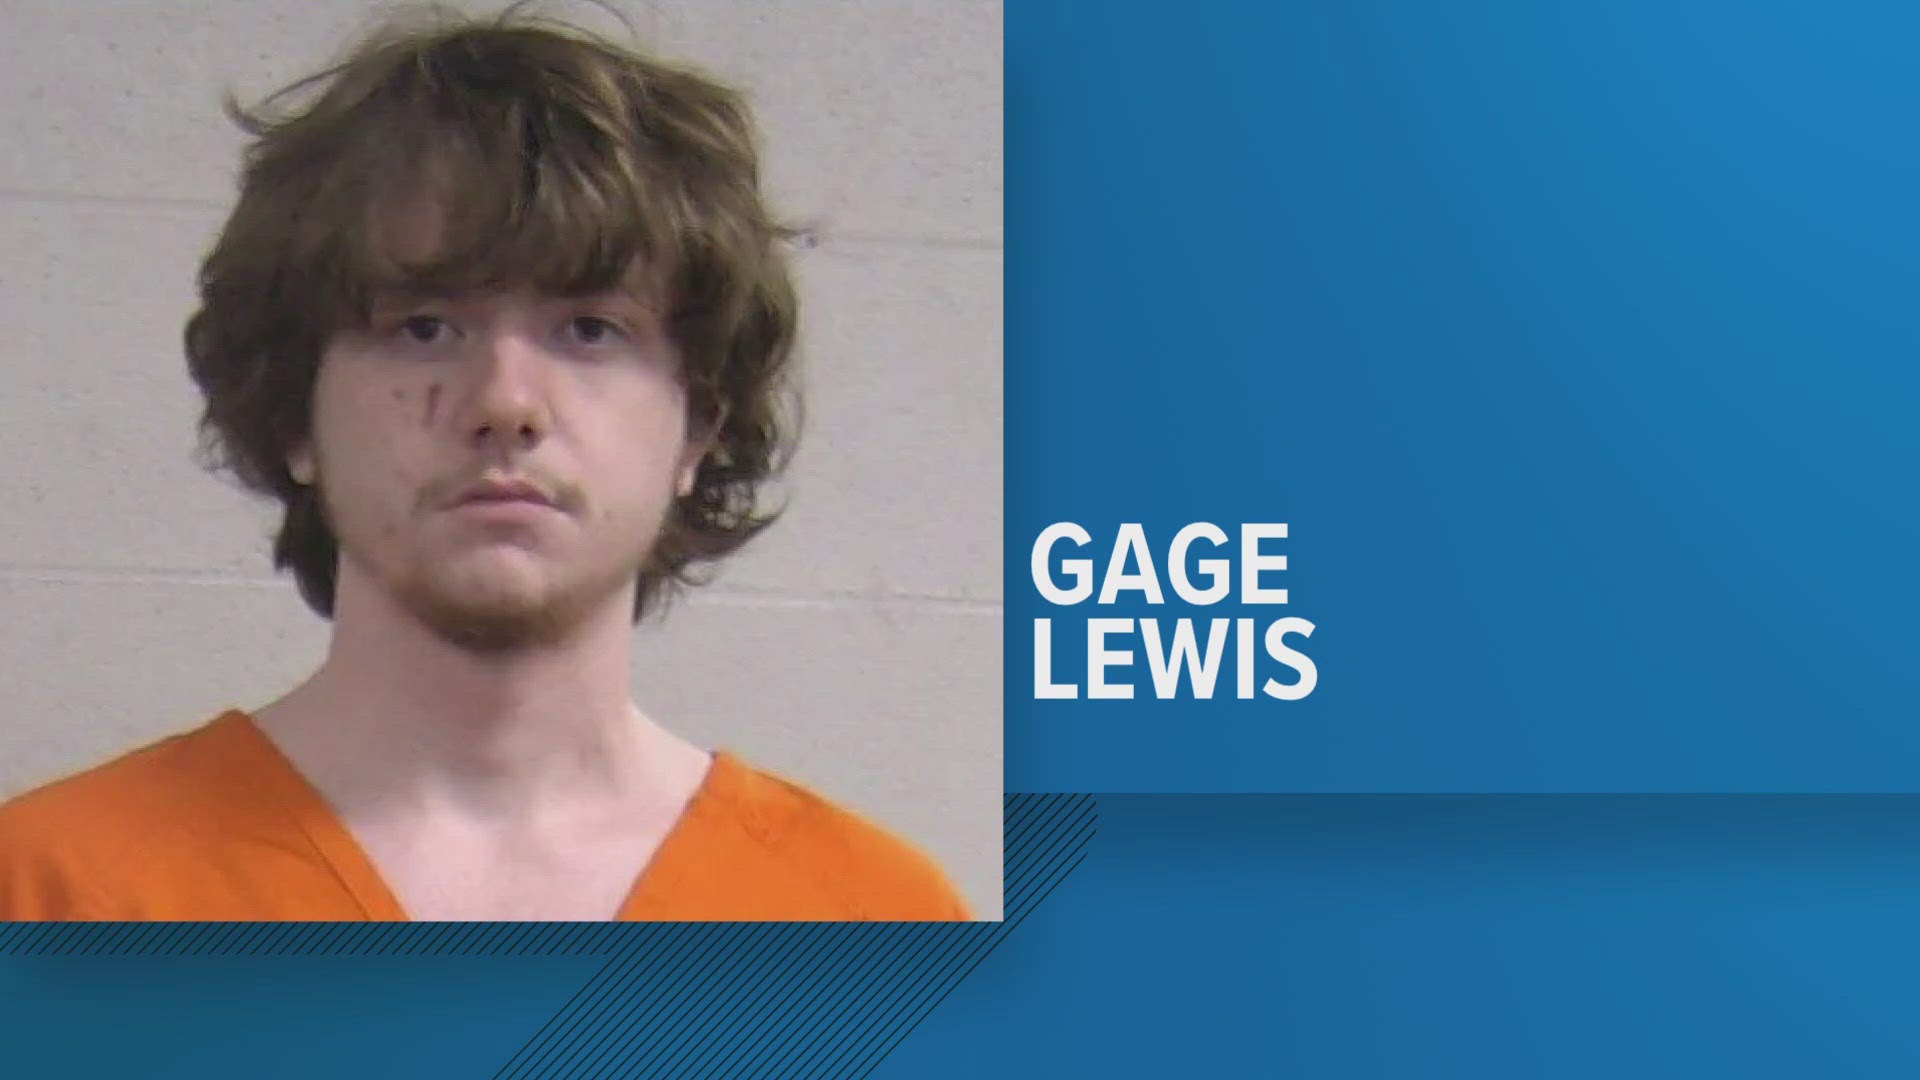 According to police, Gage Lewis shot two people inside a gas station in the Beechmont neighborhood Saturday night.